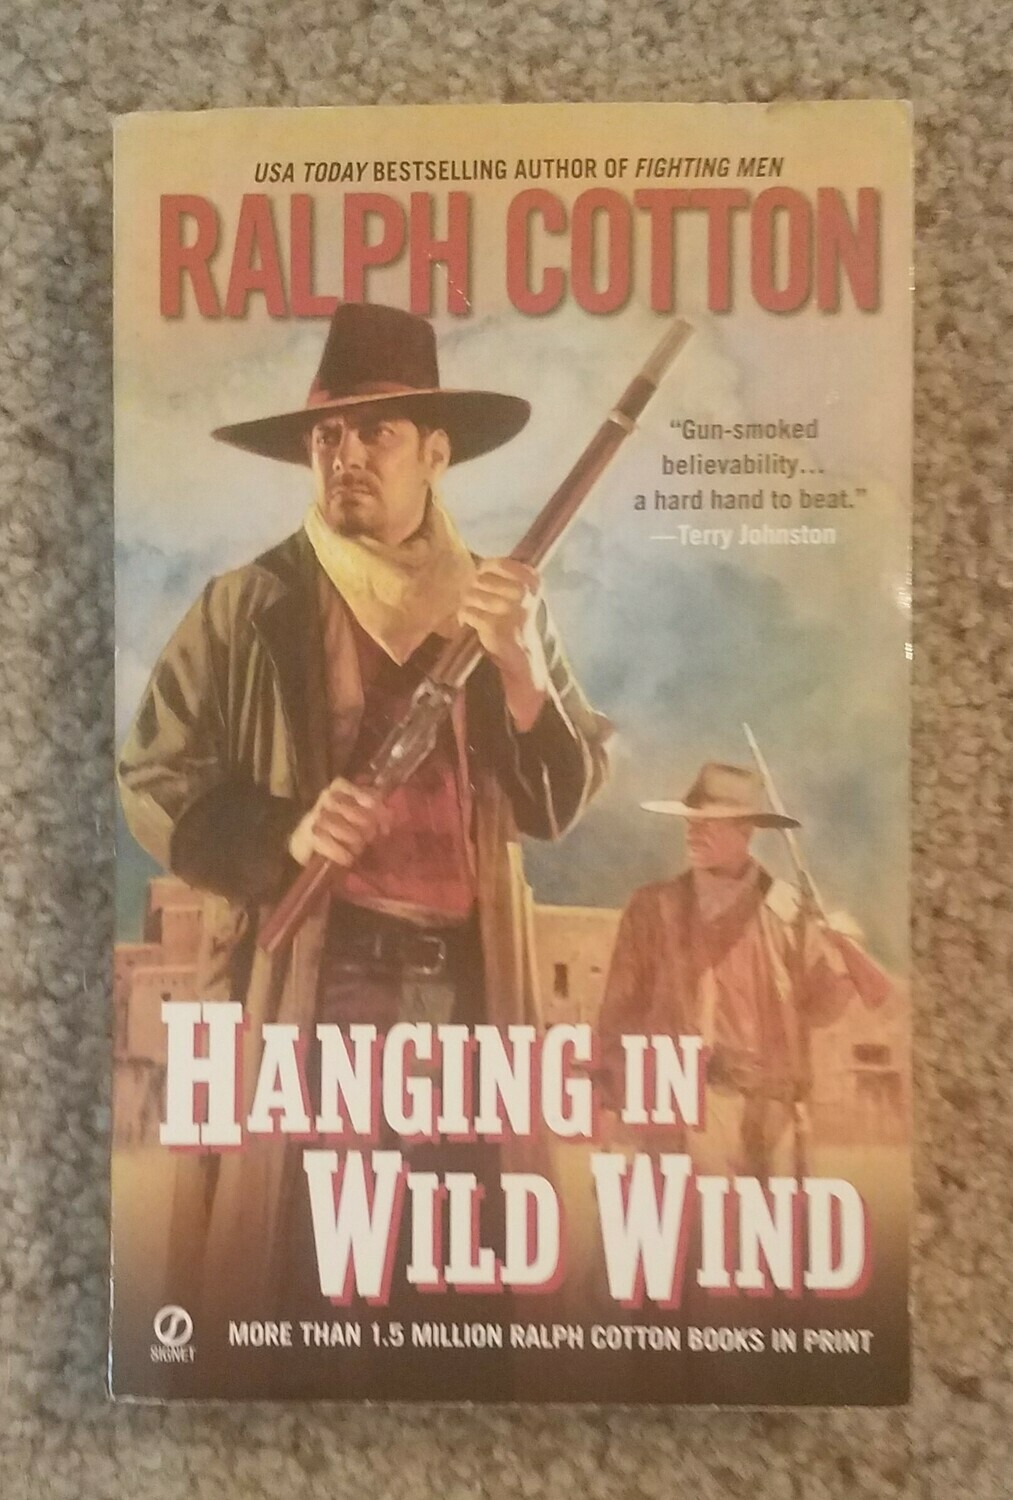 Hanging in Wild Wind by Ralph Cotton